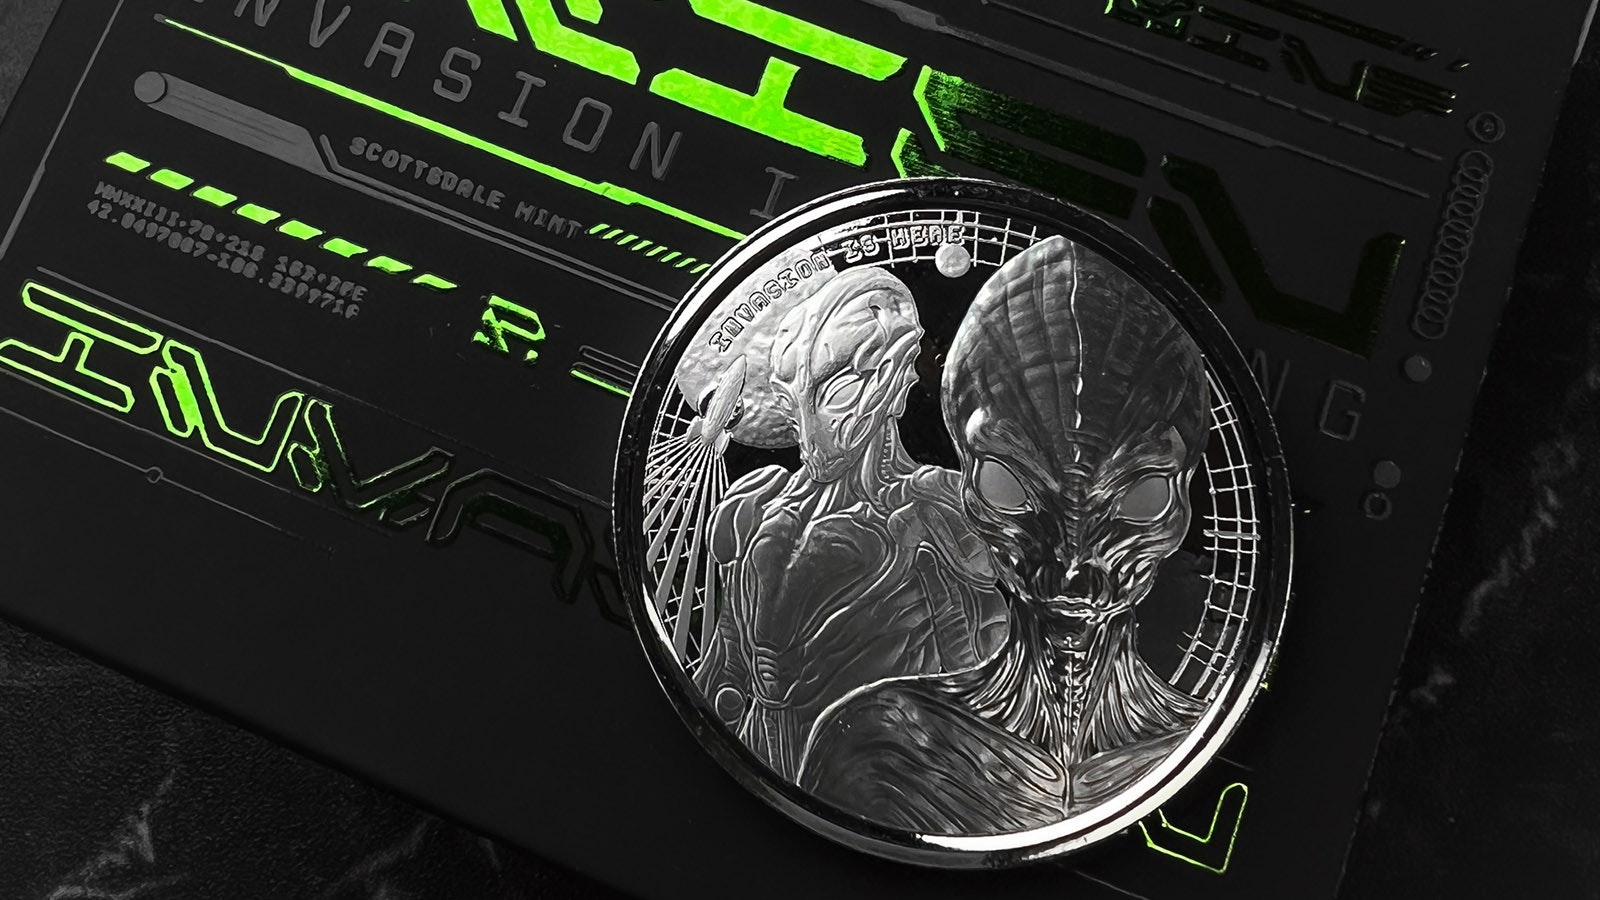 There's a commemorative coin for everything, even an alien invasion.